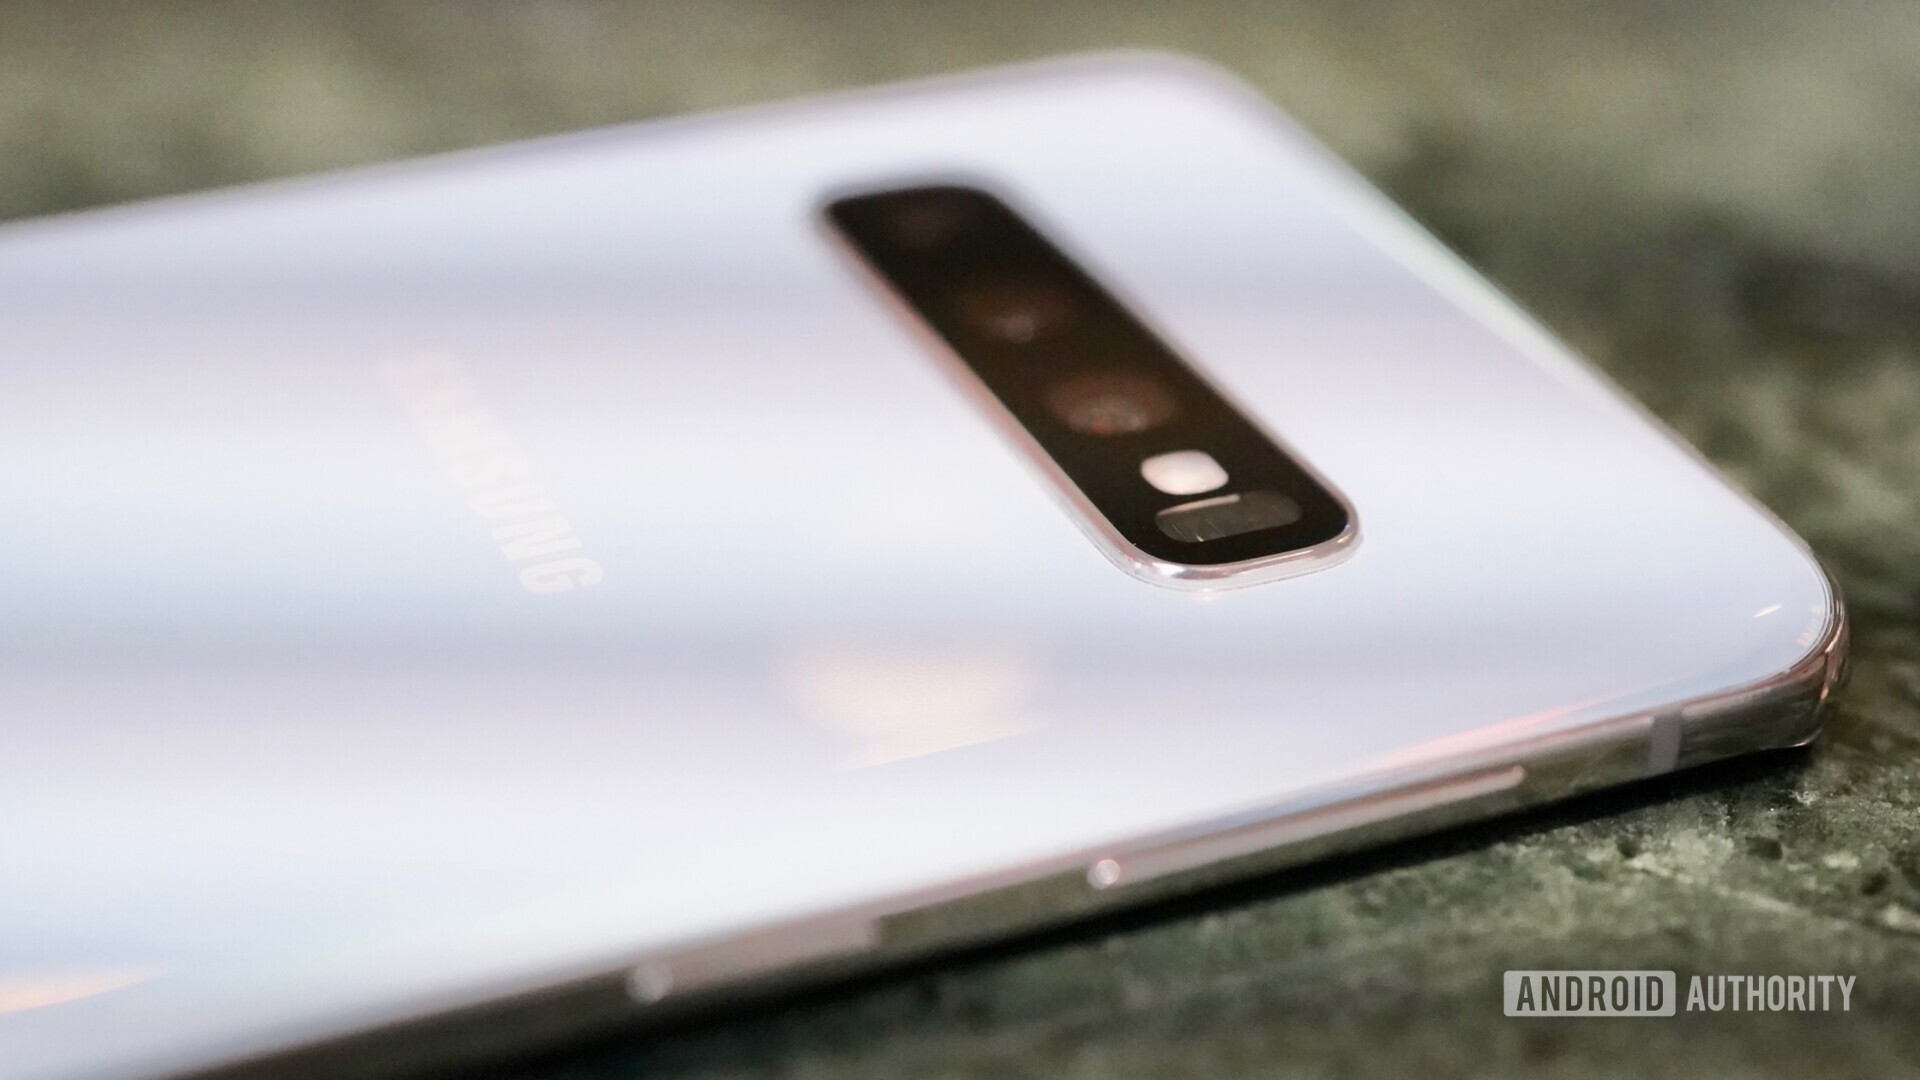 Side view of the Samsung Galaxy S10 focusing on the bixby button